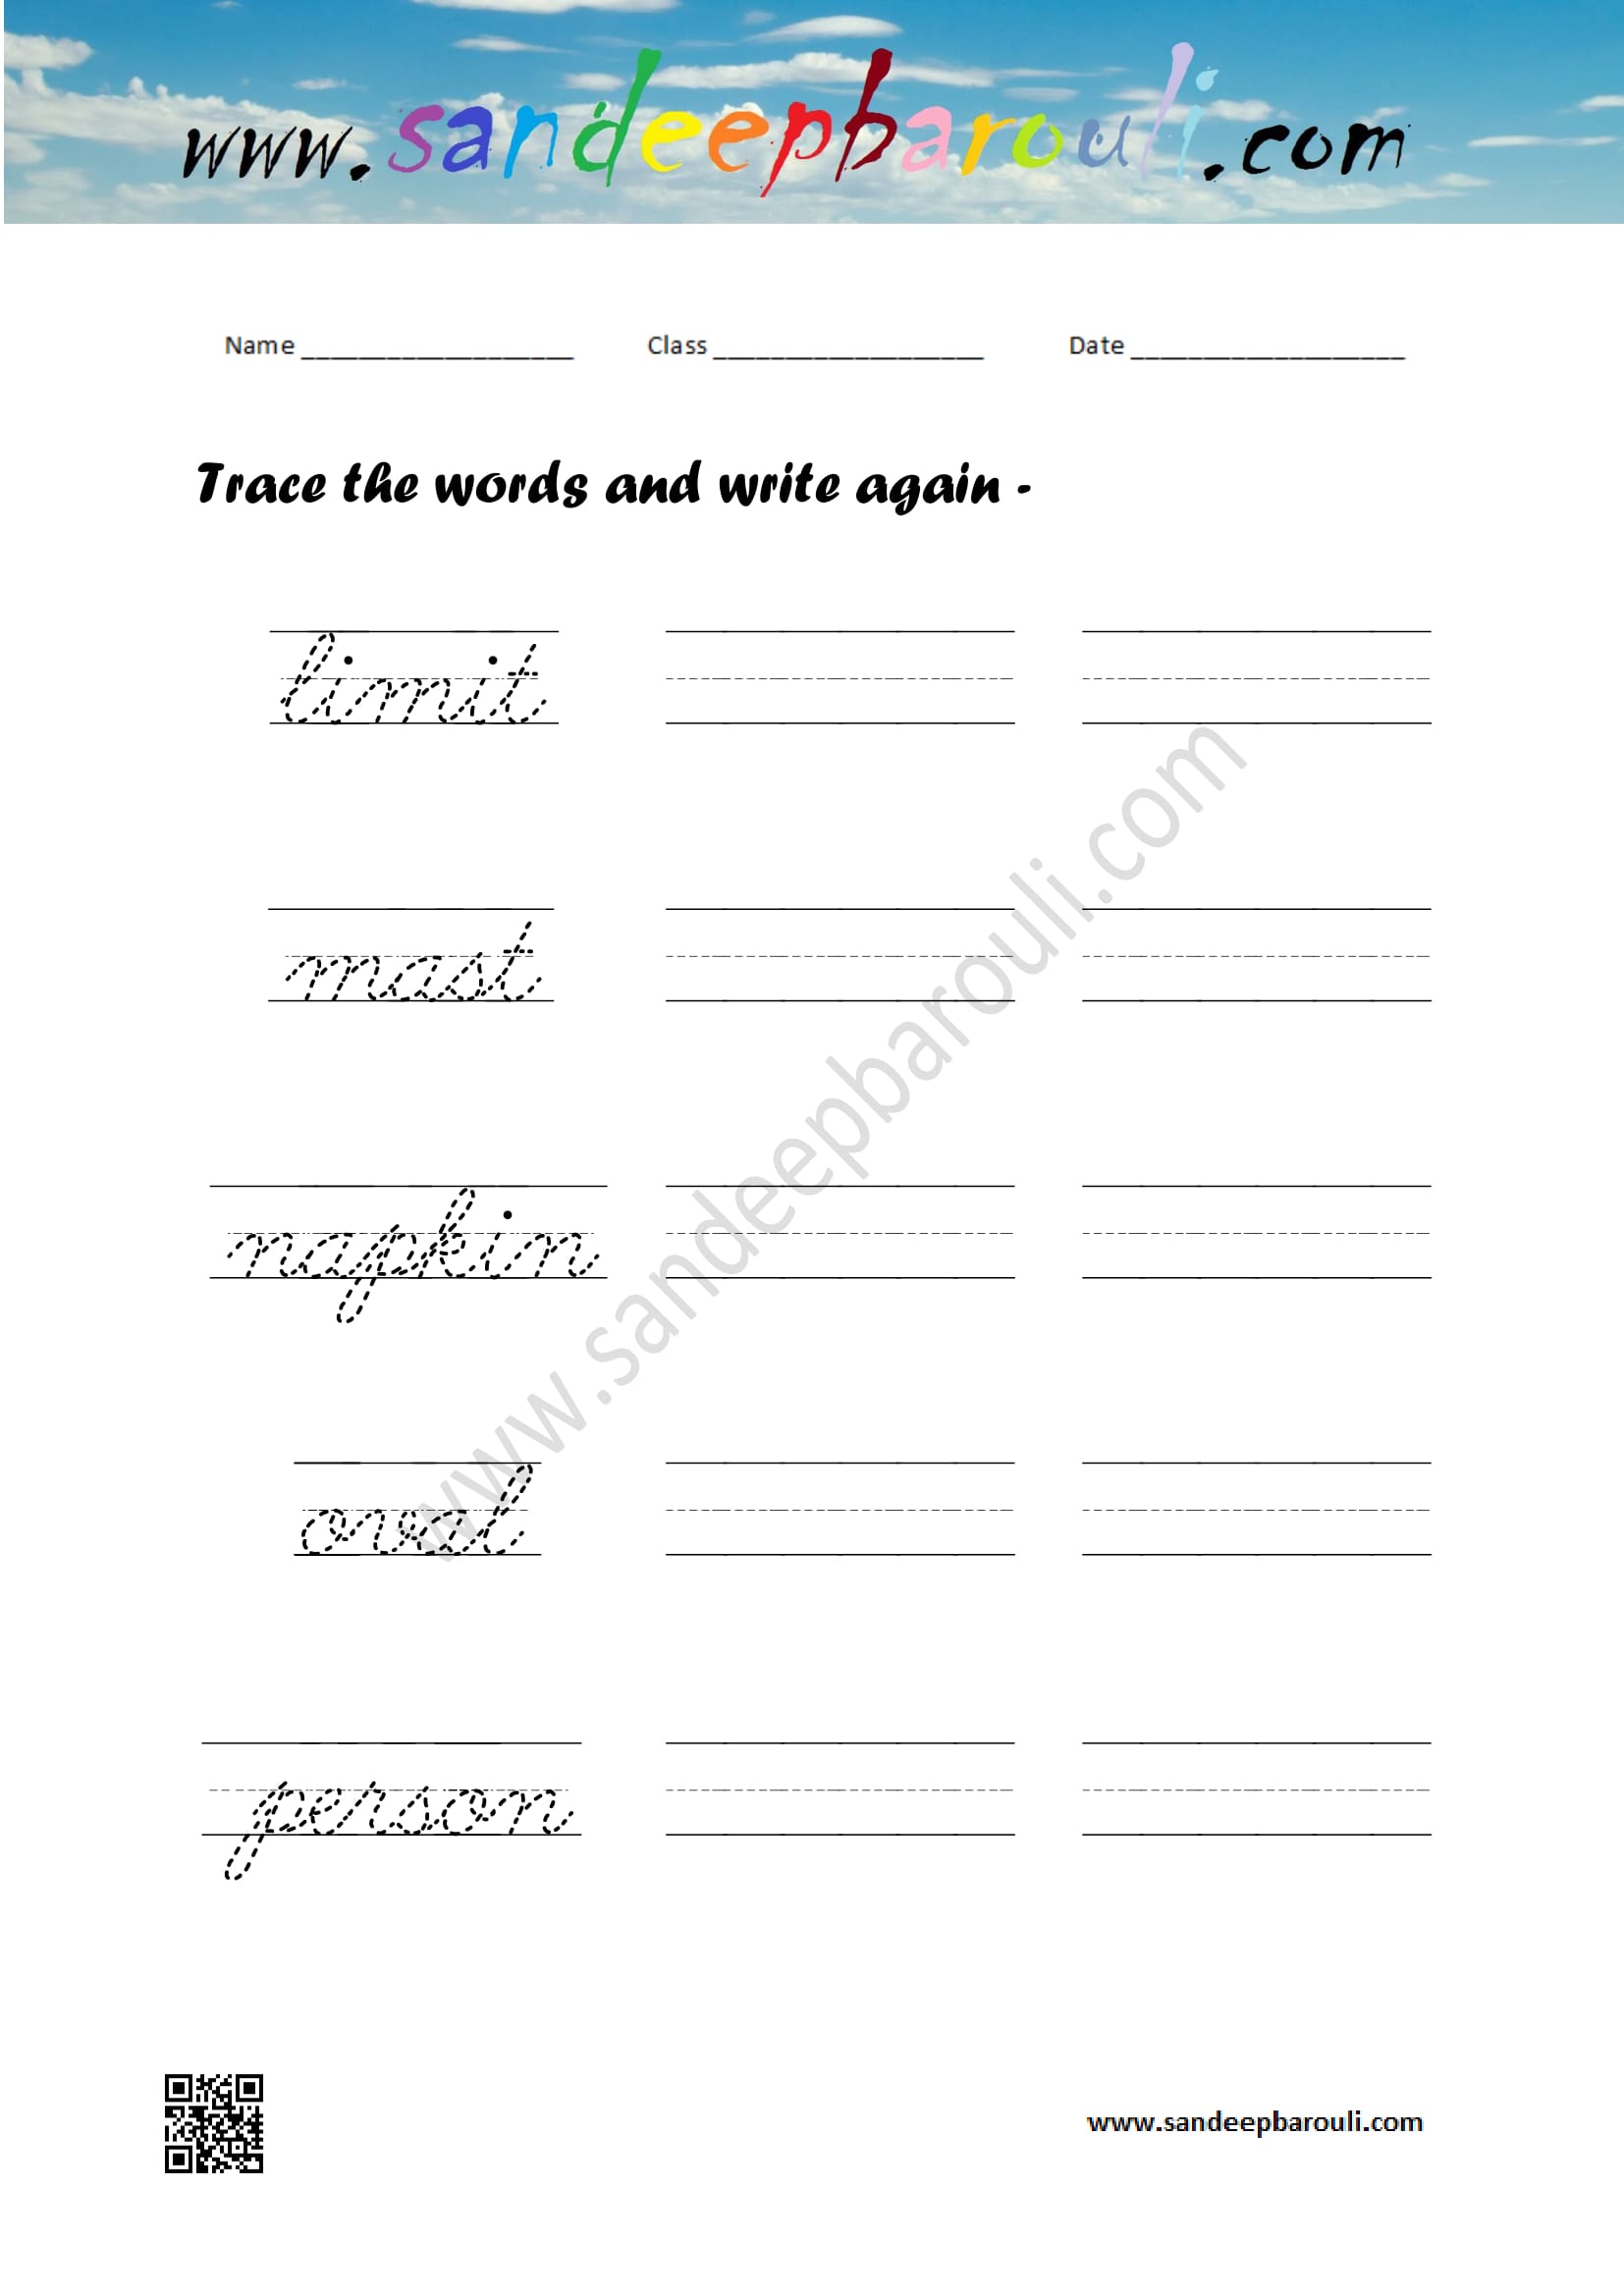 Cursive writing worksheet – trace the words and write again (78)